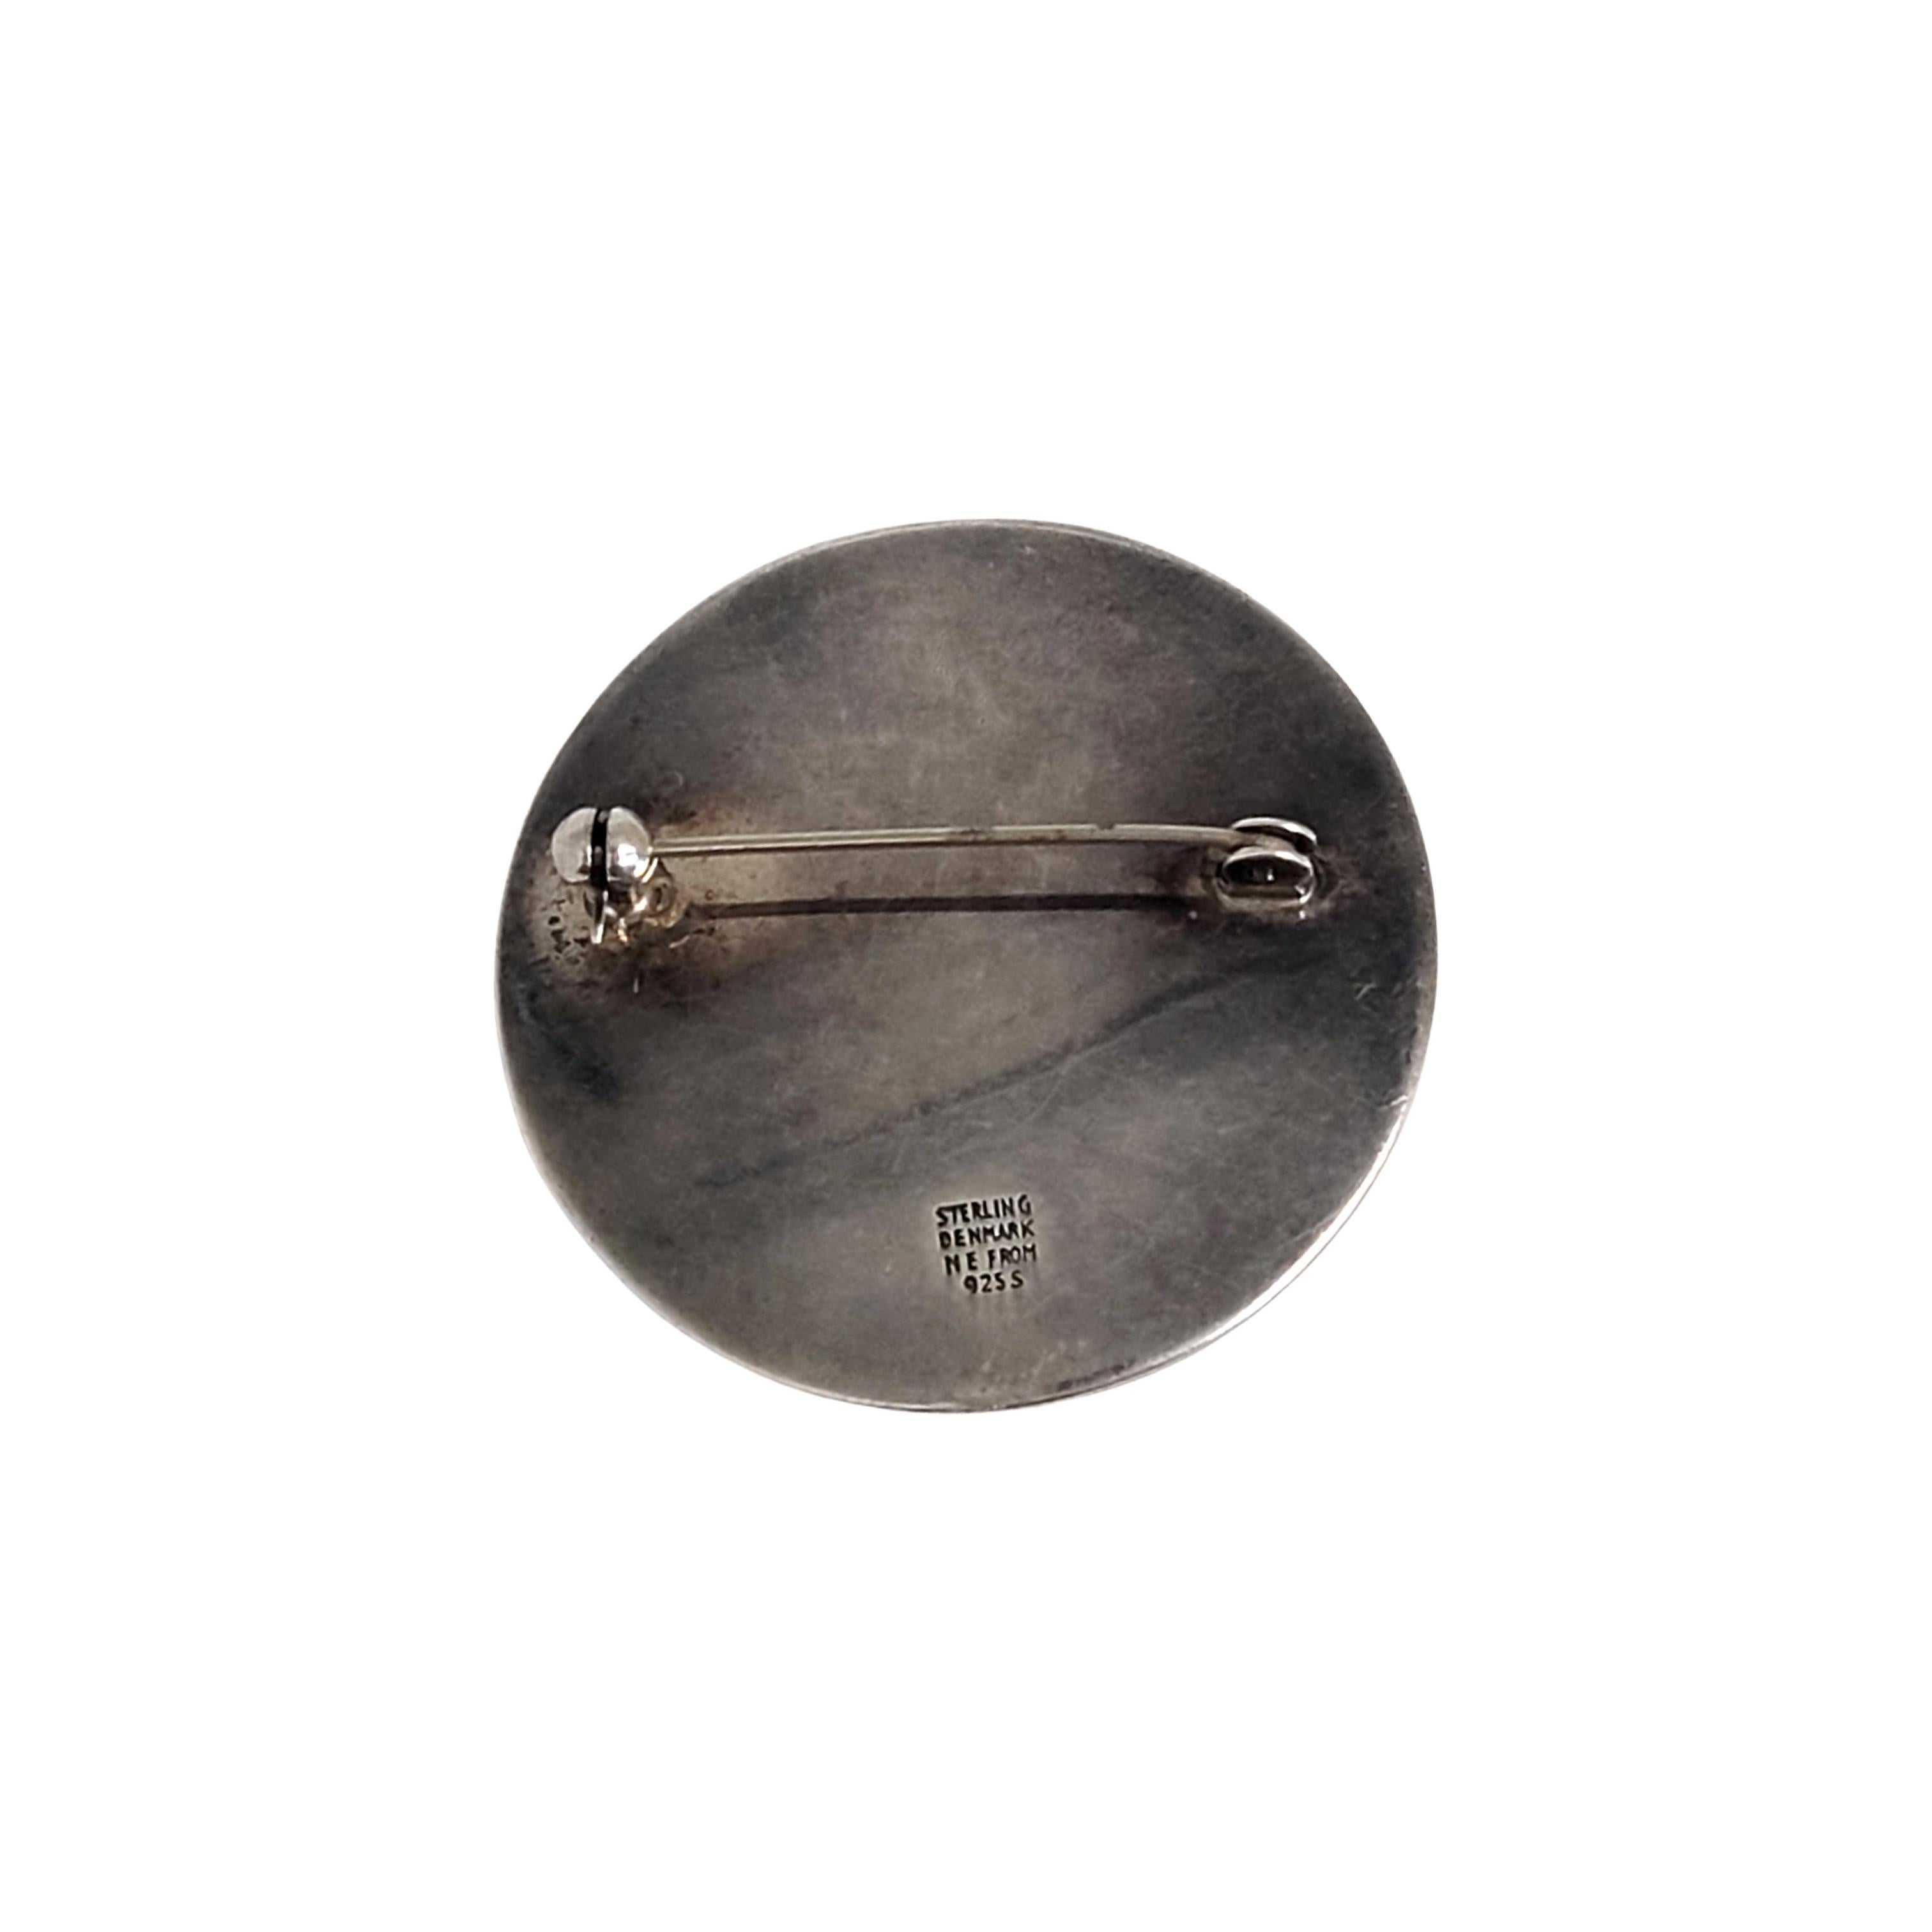 Vintage sterling silver round circle pin/brooch by Niels Erik From (NE FROM) of Denmark.

Niels Erik From was one of the great Danish silversmiths and designers from 1931 thru his death in the 1980s. He created many floral and nature inspired design